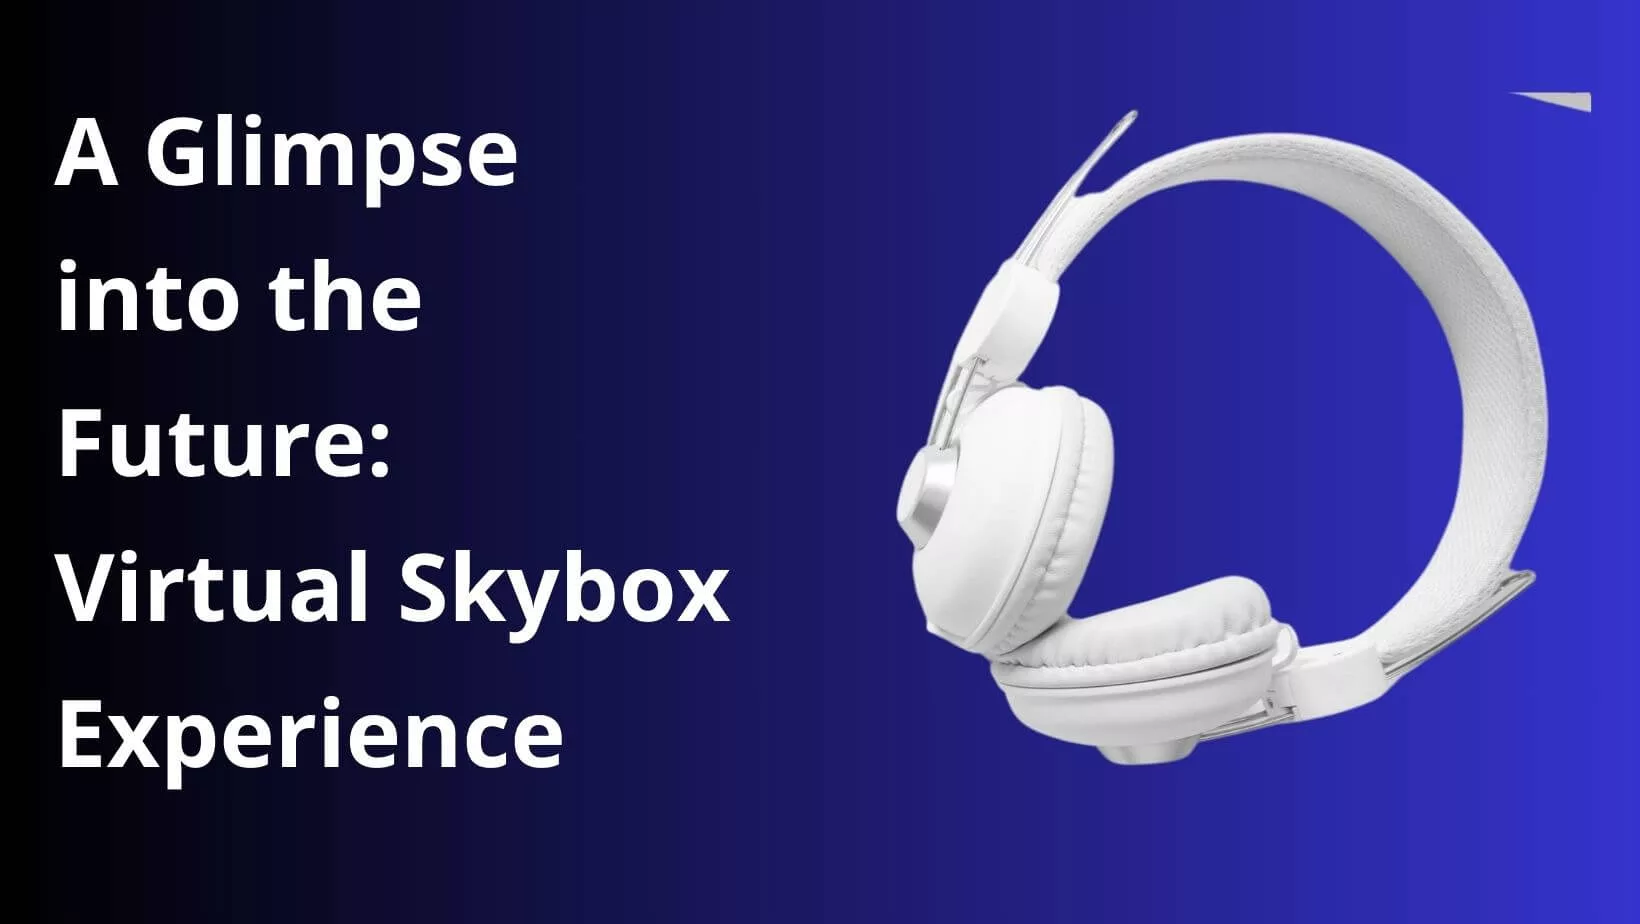 A Glimpse into the Future: Virtual Skybox Experience